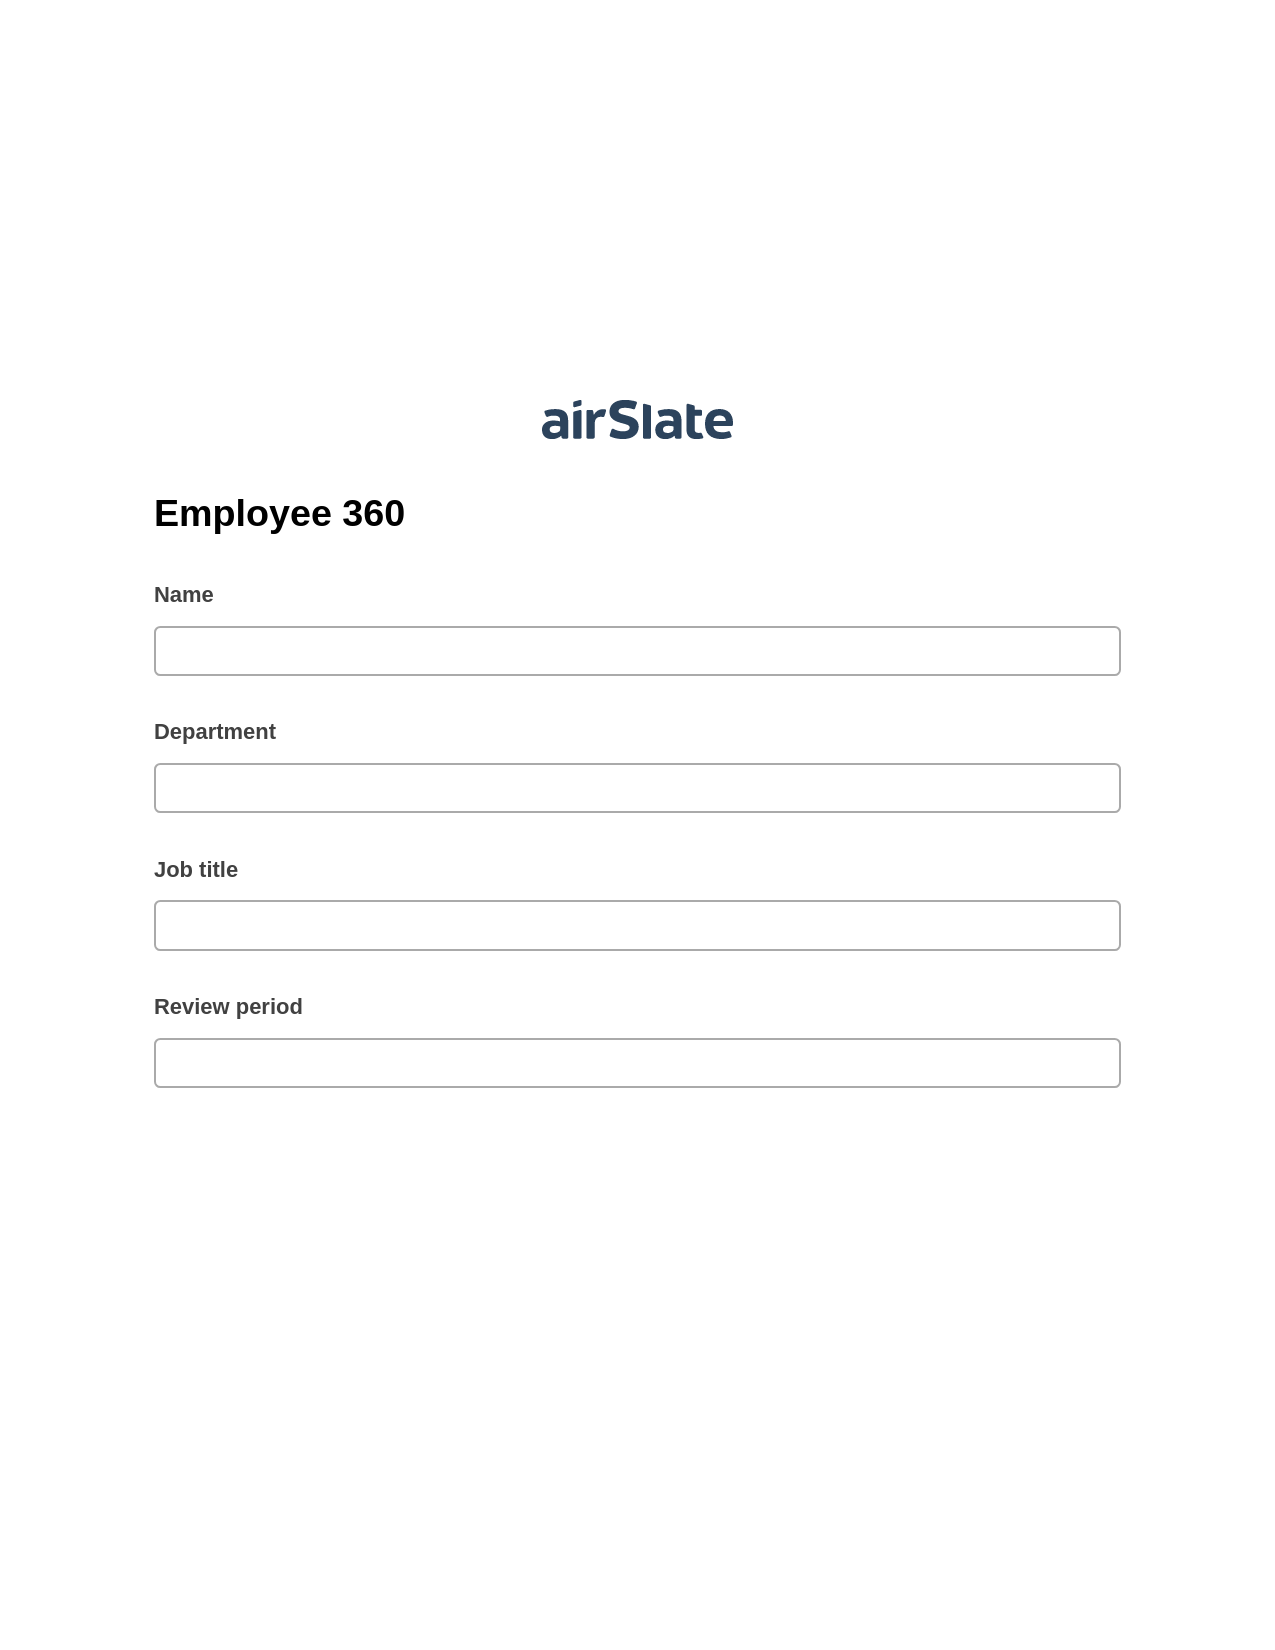 Employee 360 Pre-fill from CSV File Bot, Create slate addon, Archive to Google Drive Bot